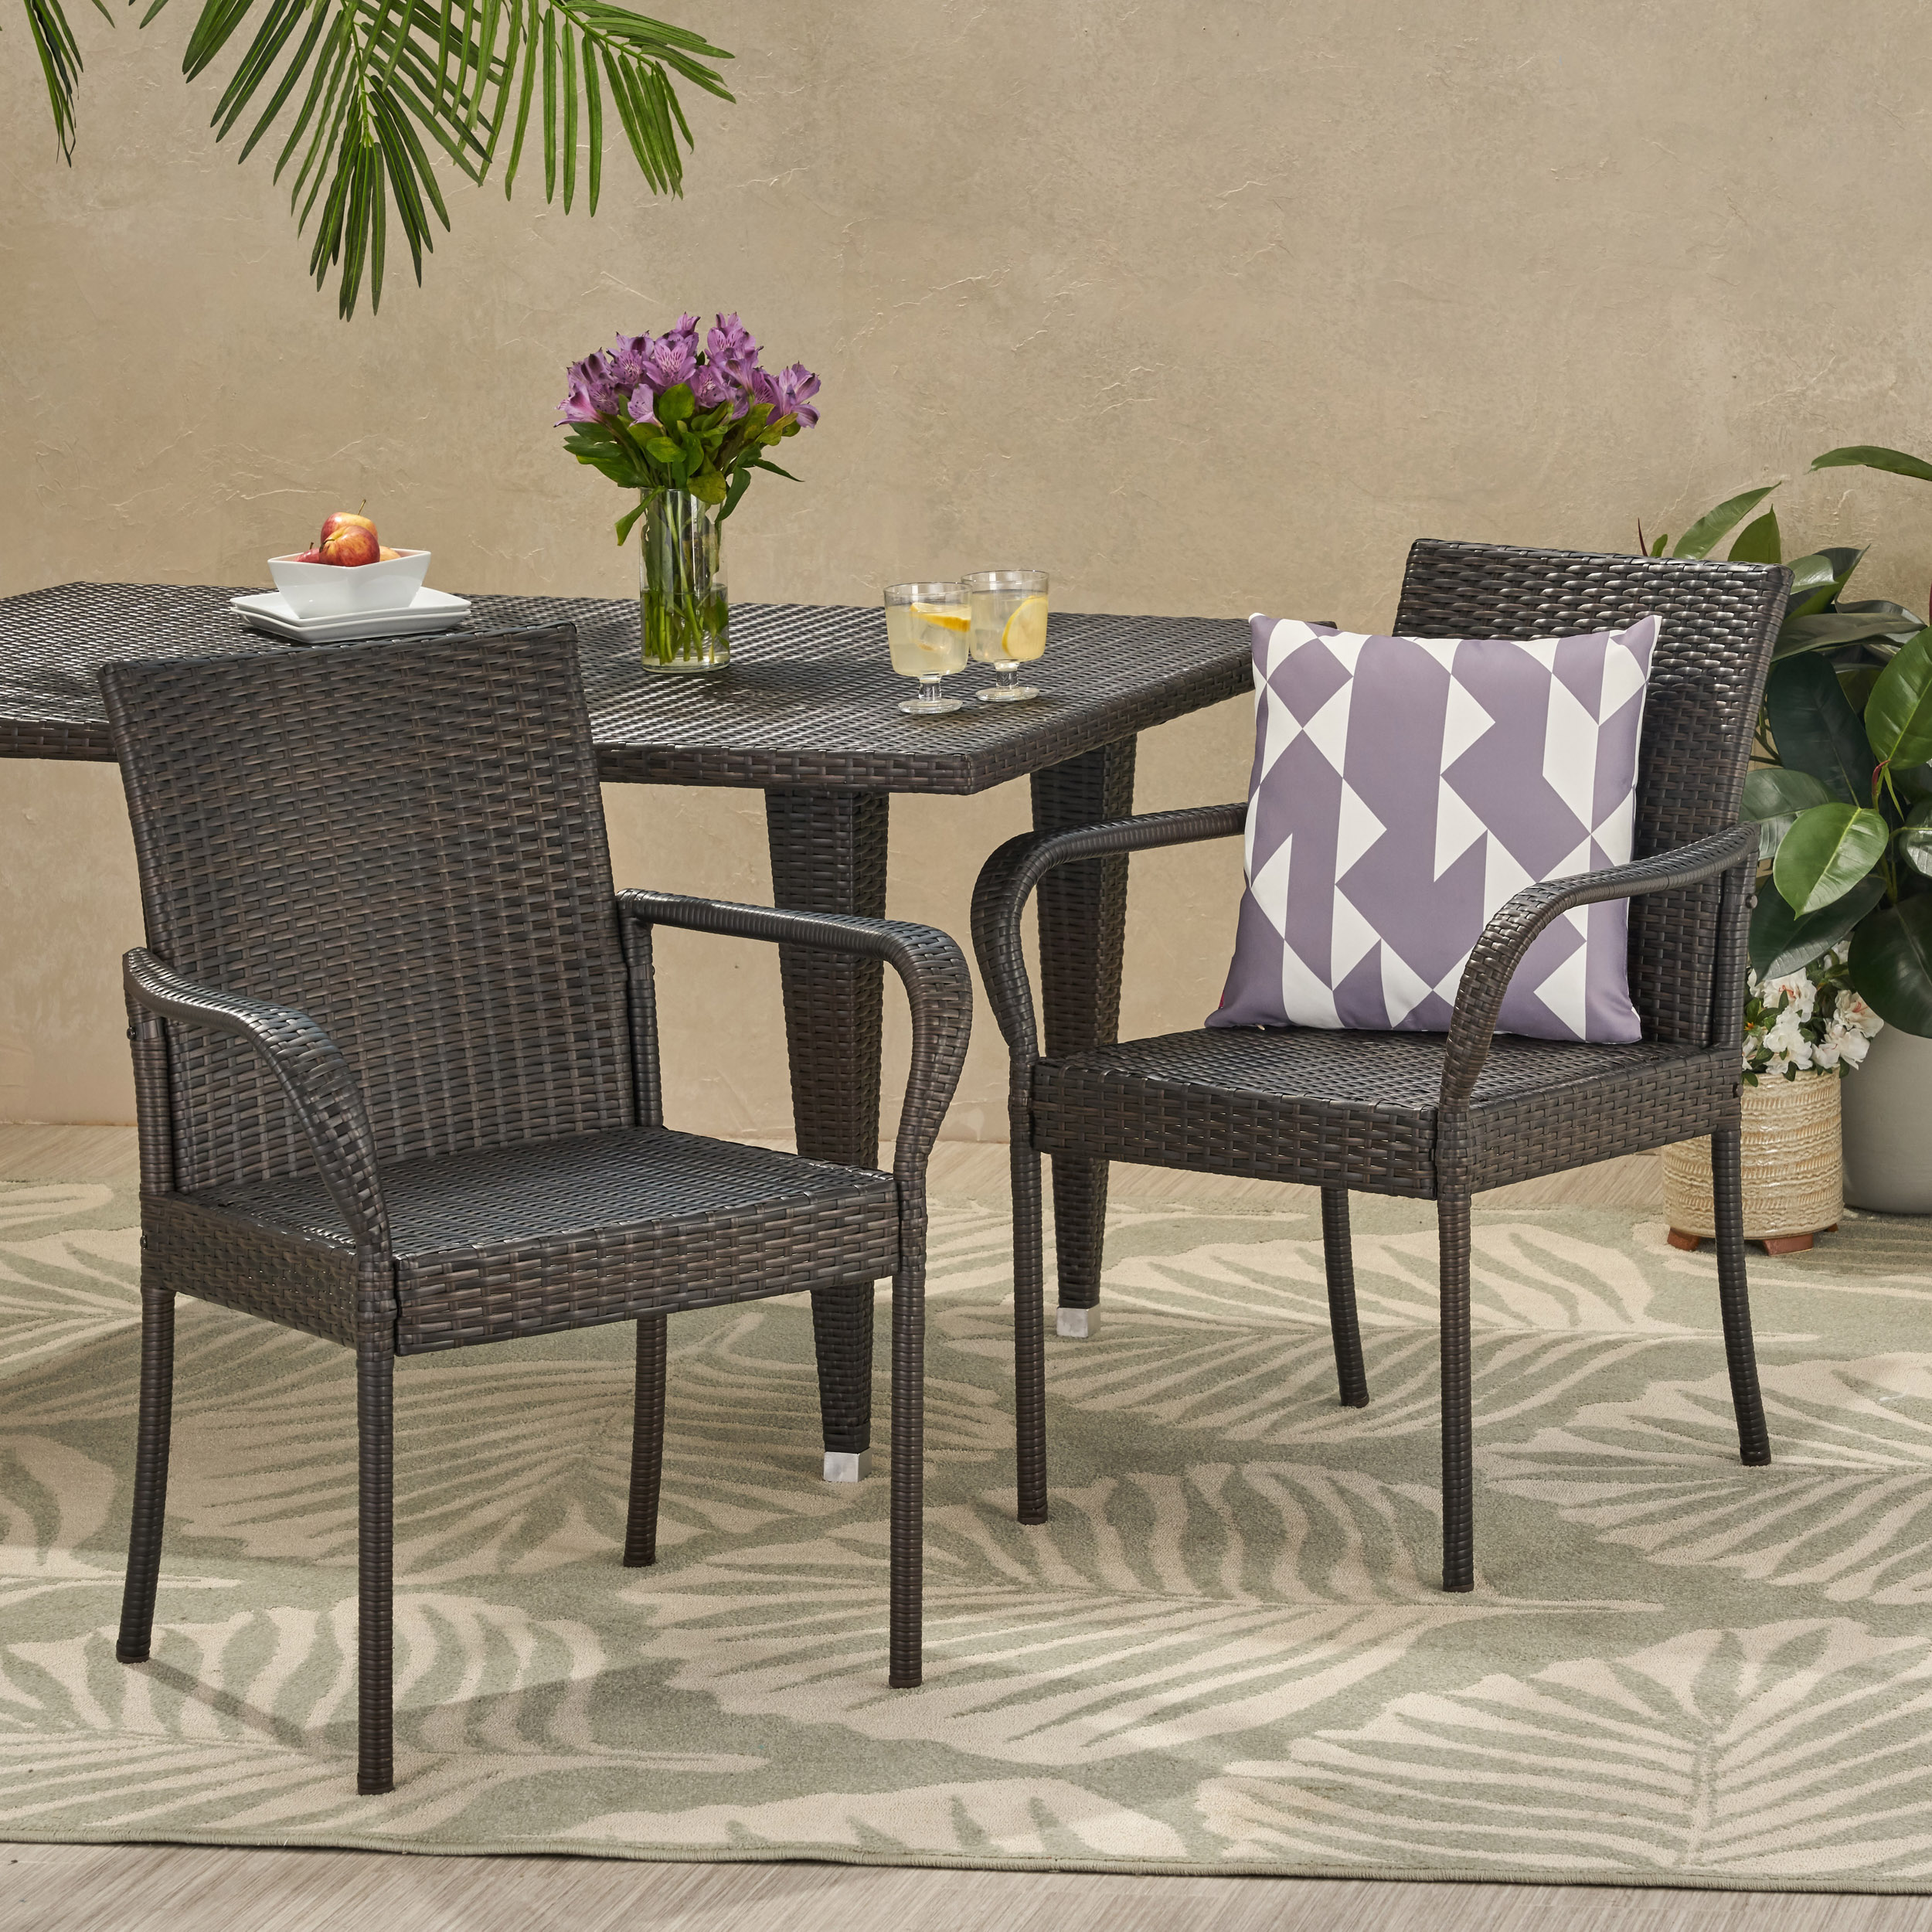 Noble House Trombone Outdoor Wicker Dining Chair in Multibrown (Set of 2) - image 2 of 7